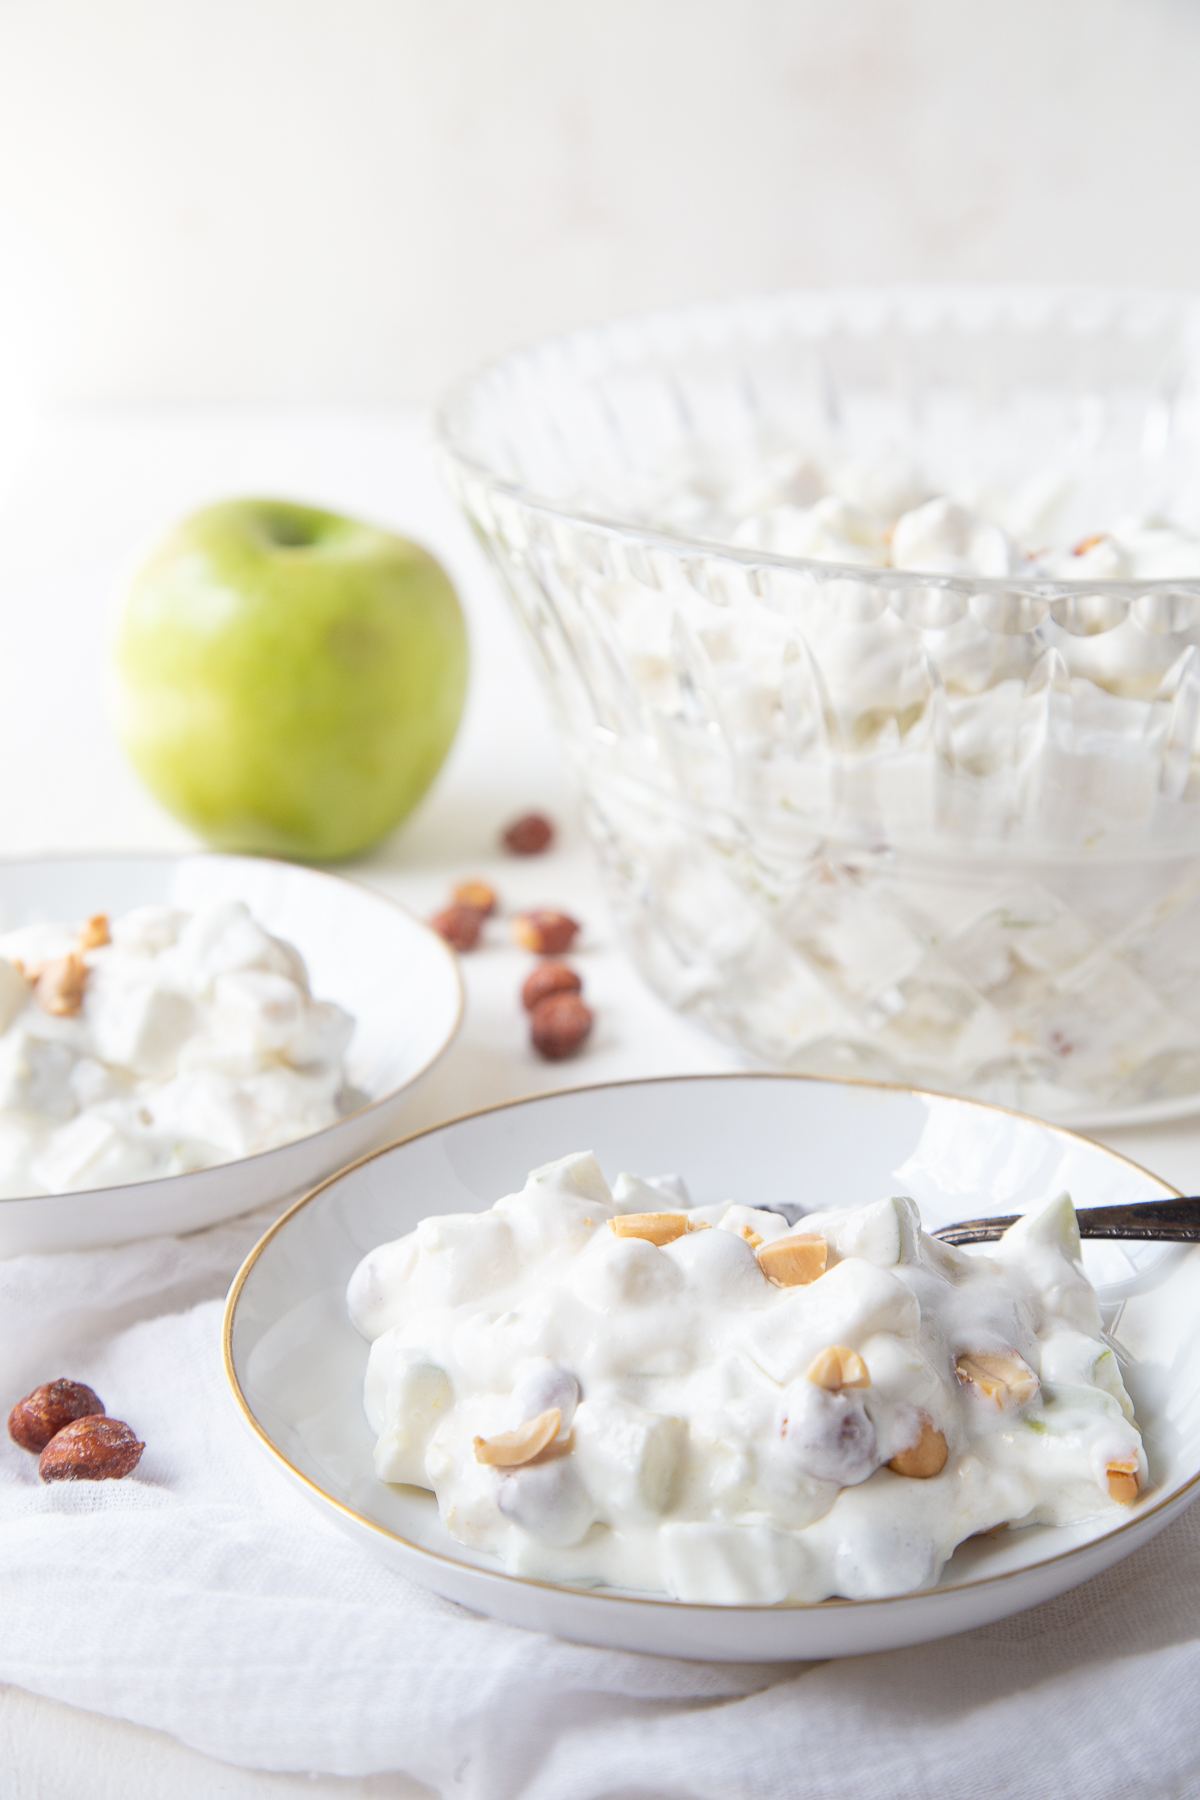 white shallow bowls filled with taffy apple salad next to a glass bowl and a green apple.